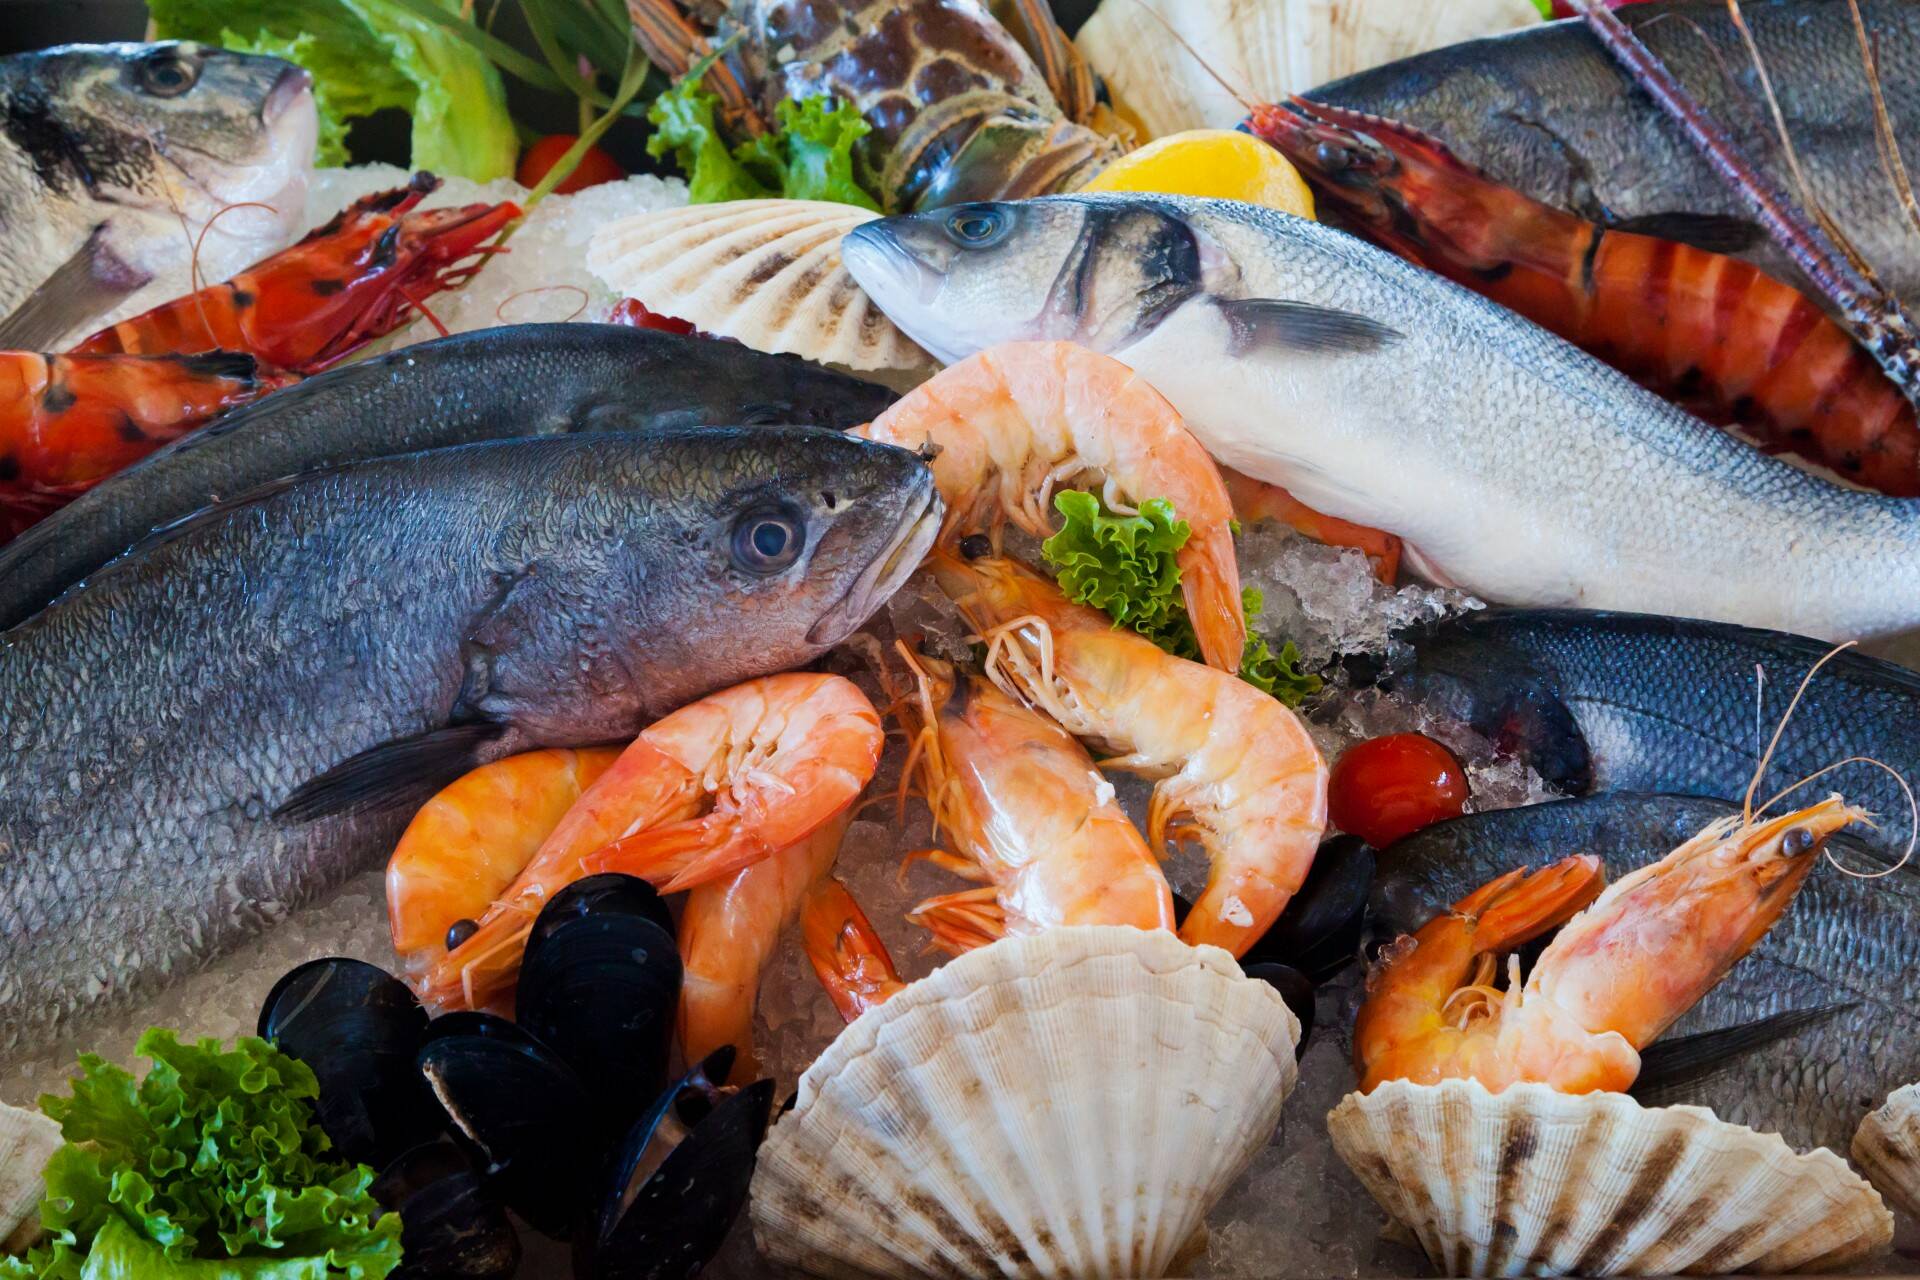 An array of seafood. Public domain image.